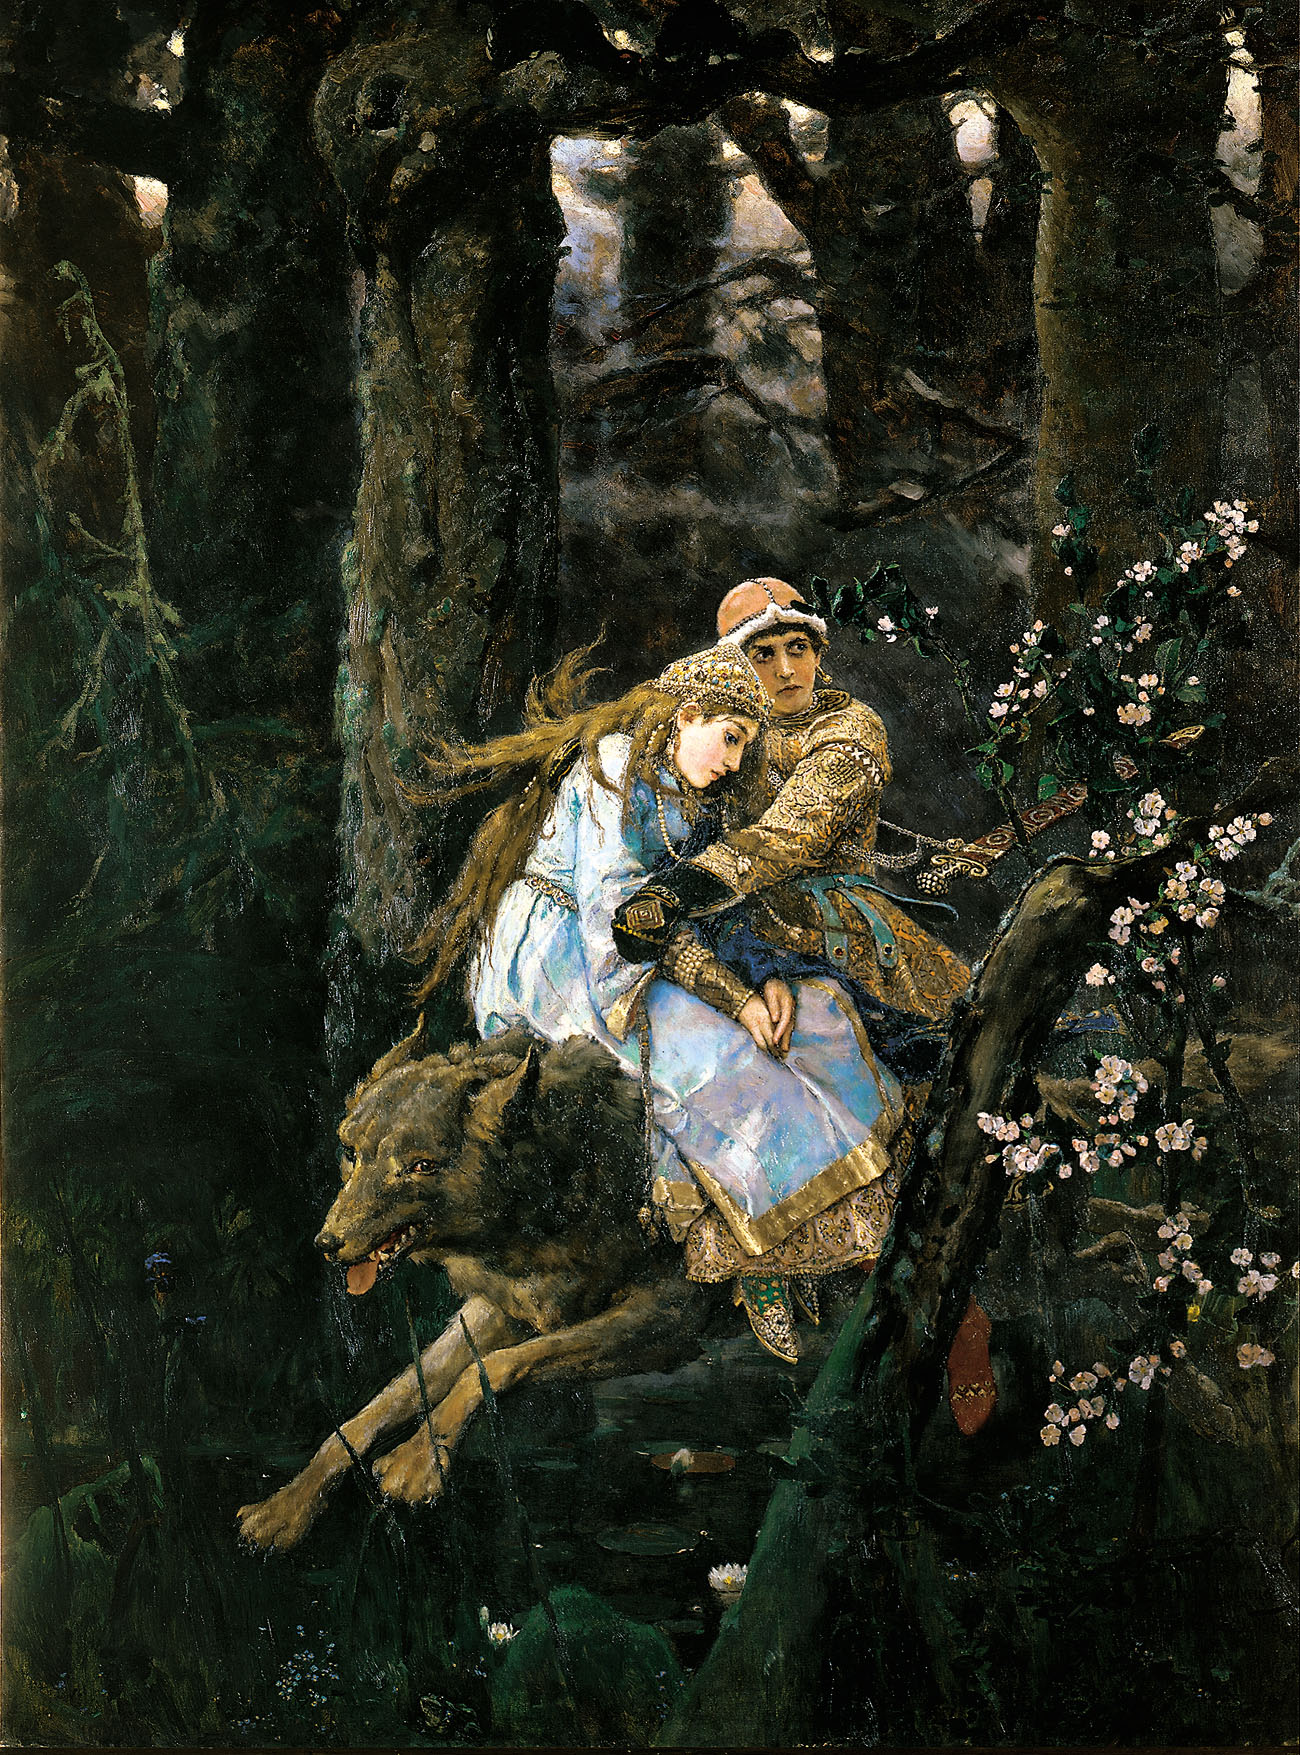 Illustration for the Russian folk tale ``Ivan Tsarevich and the Gray Wolf'' by V.M. Vasnetsov.